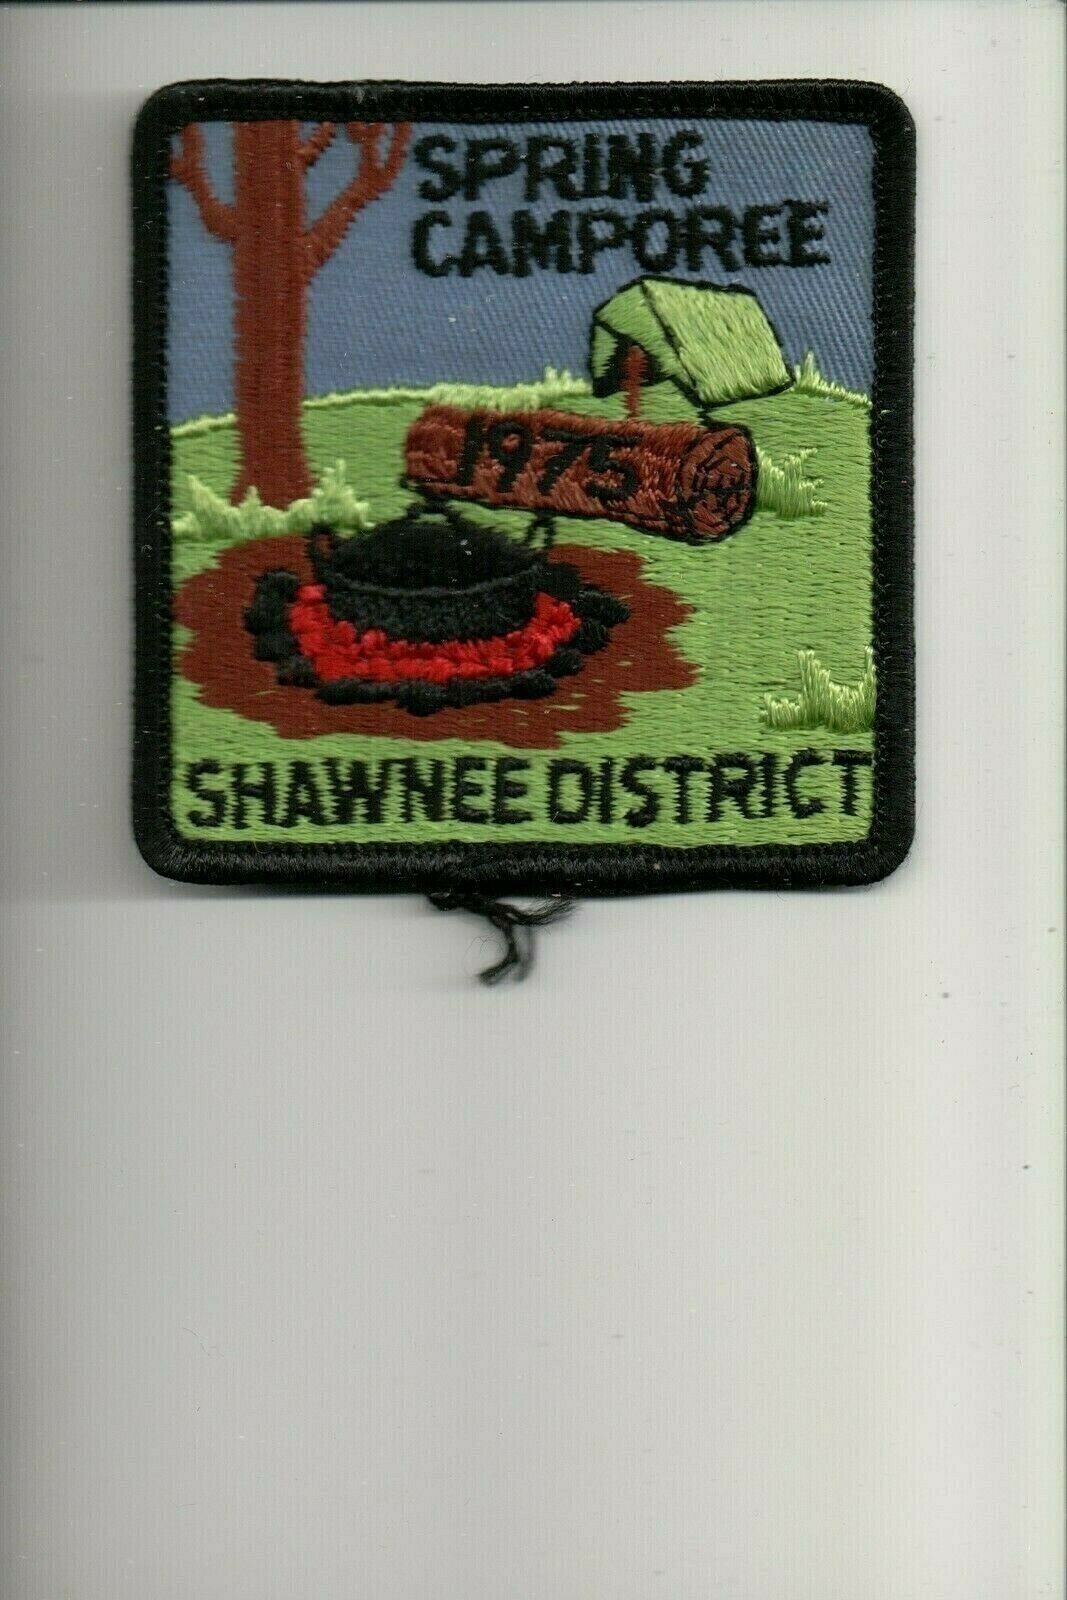 1975 Shawnee District Spring Camporee patch